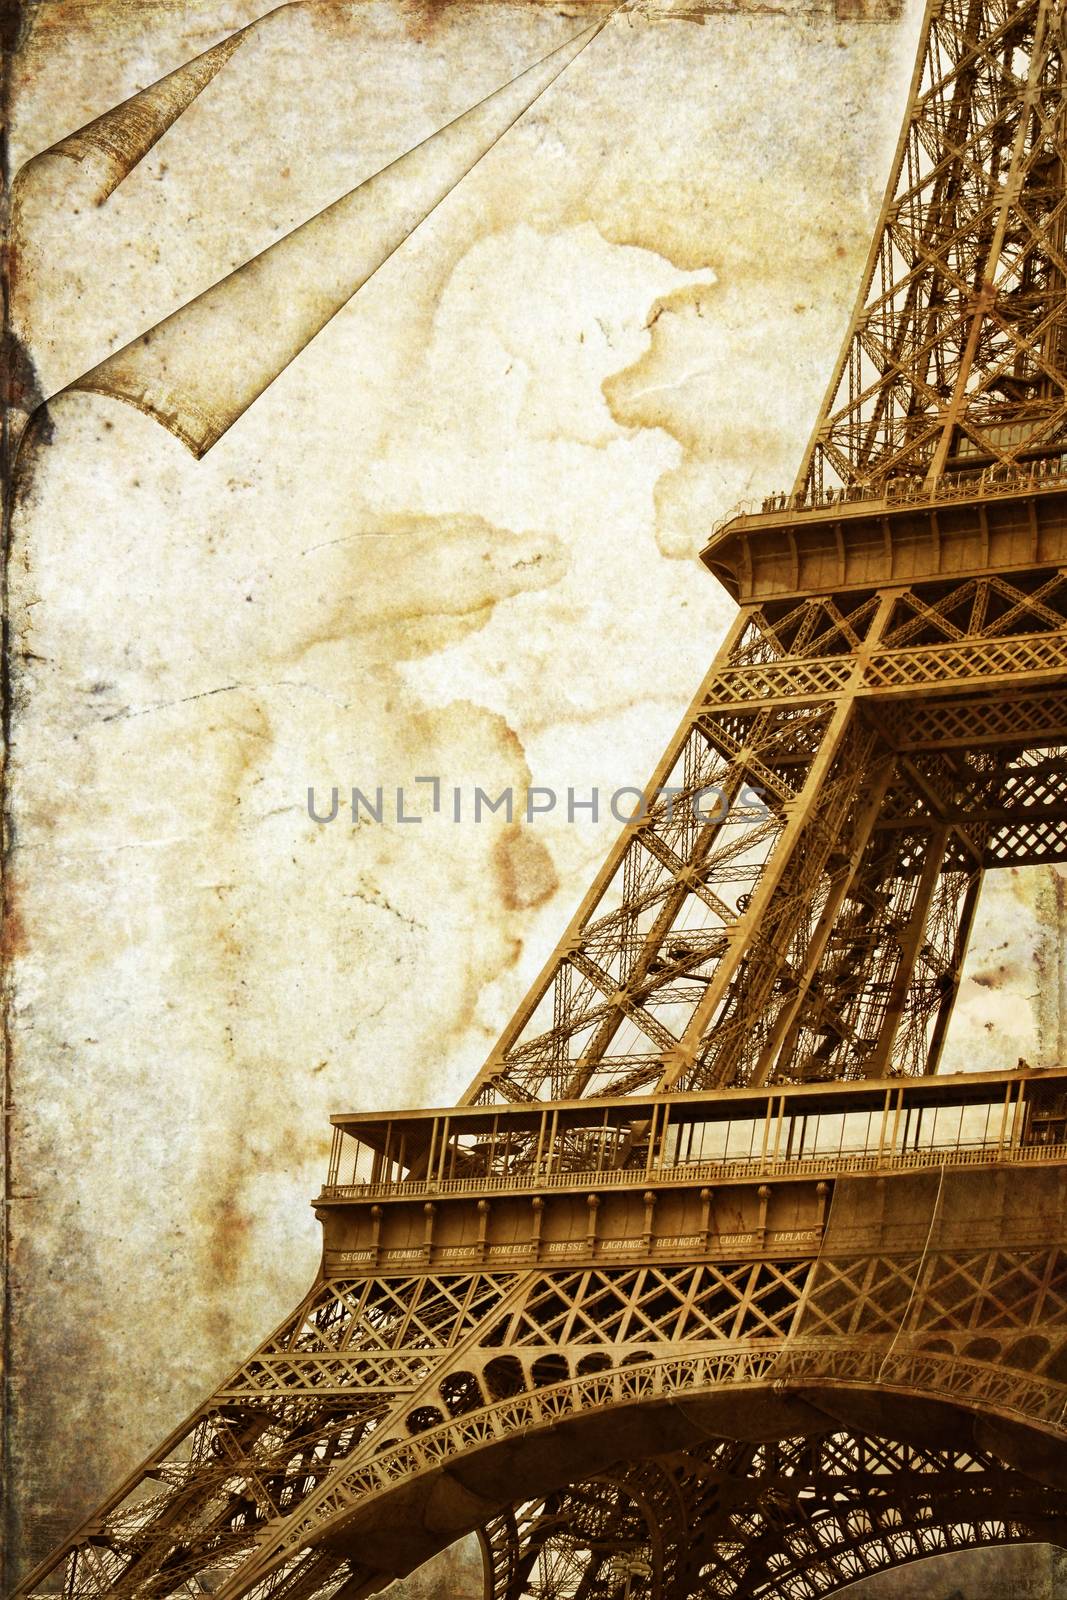 Abstract view of the Eiffel Tower in Paris. France